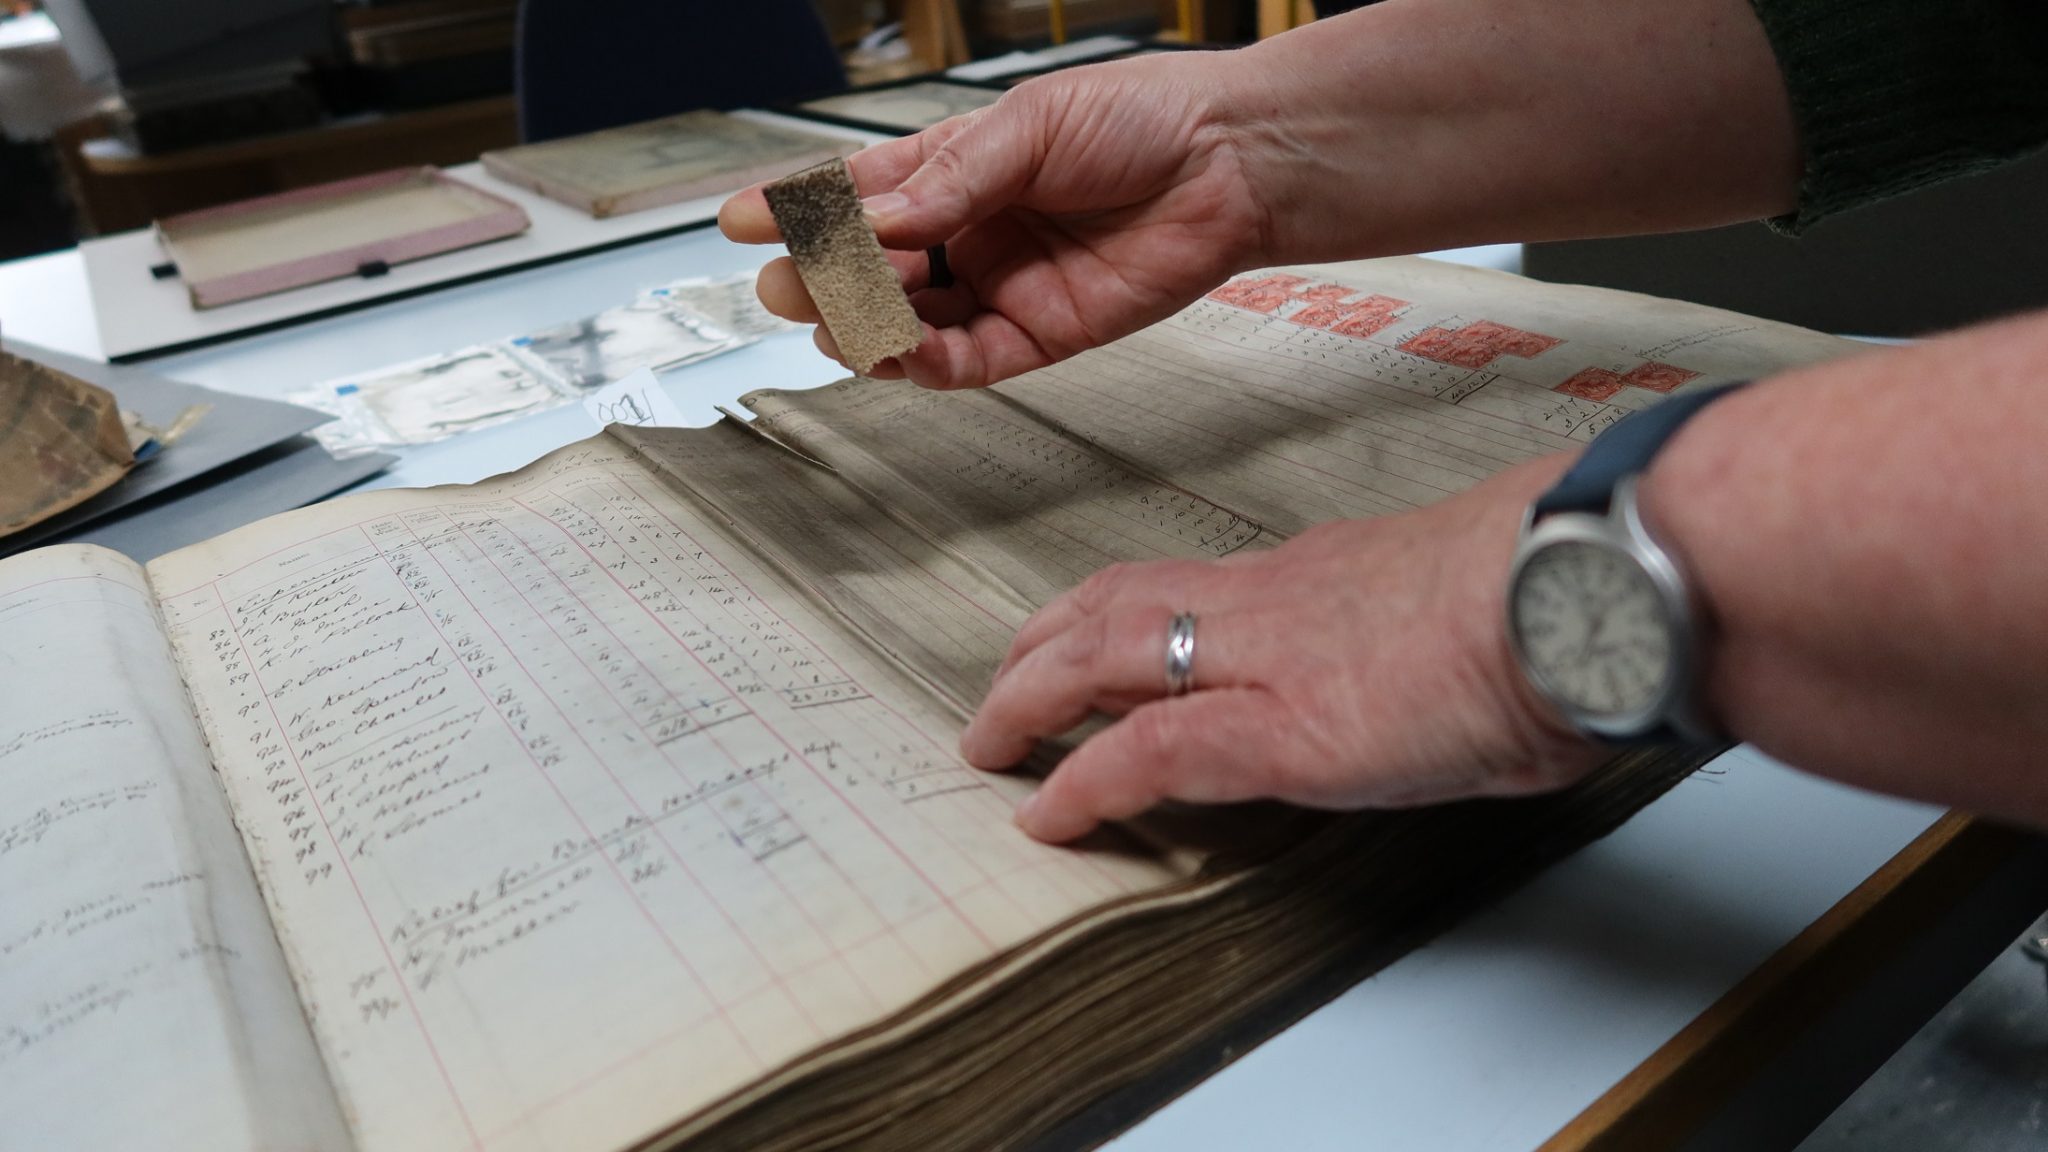 Cleaning surface dirt off the pages of a ledger of Tower Bridge staff